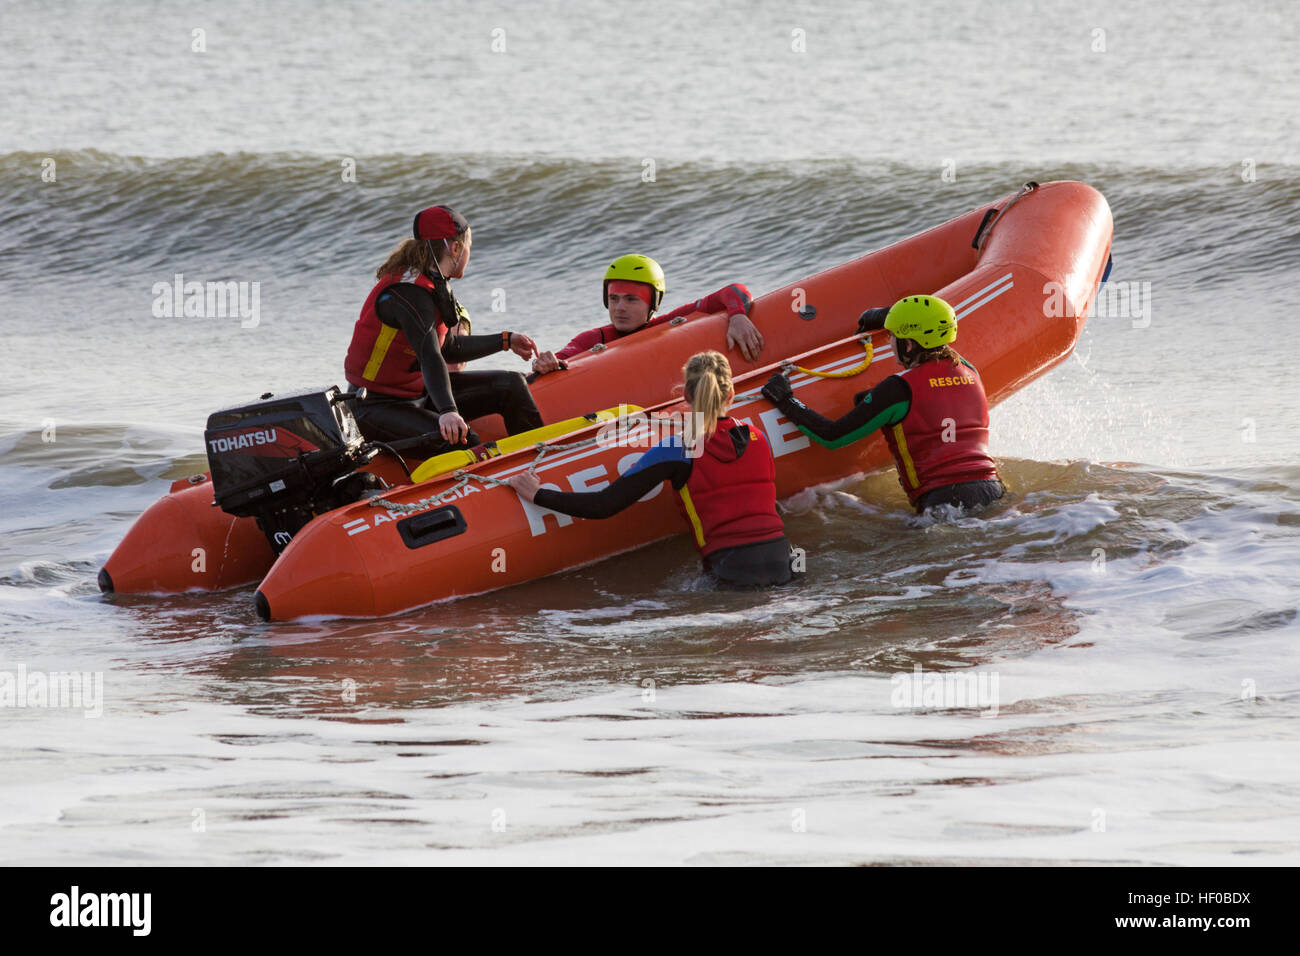 Durley Chine, Bournemouth, Dorset, UK. 26 December 2016. Bournemouth Lifeguard Corps give a demonstration of their lifesaving skills in the sea. The Corps, founded in 1965, is one of the largest and most successful volunteer lifeguard clubs in the UK with more than 100 members aged from 7 to 70. Credit: Carolyn Jenkins/Alamy Live News Stock Photo